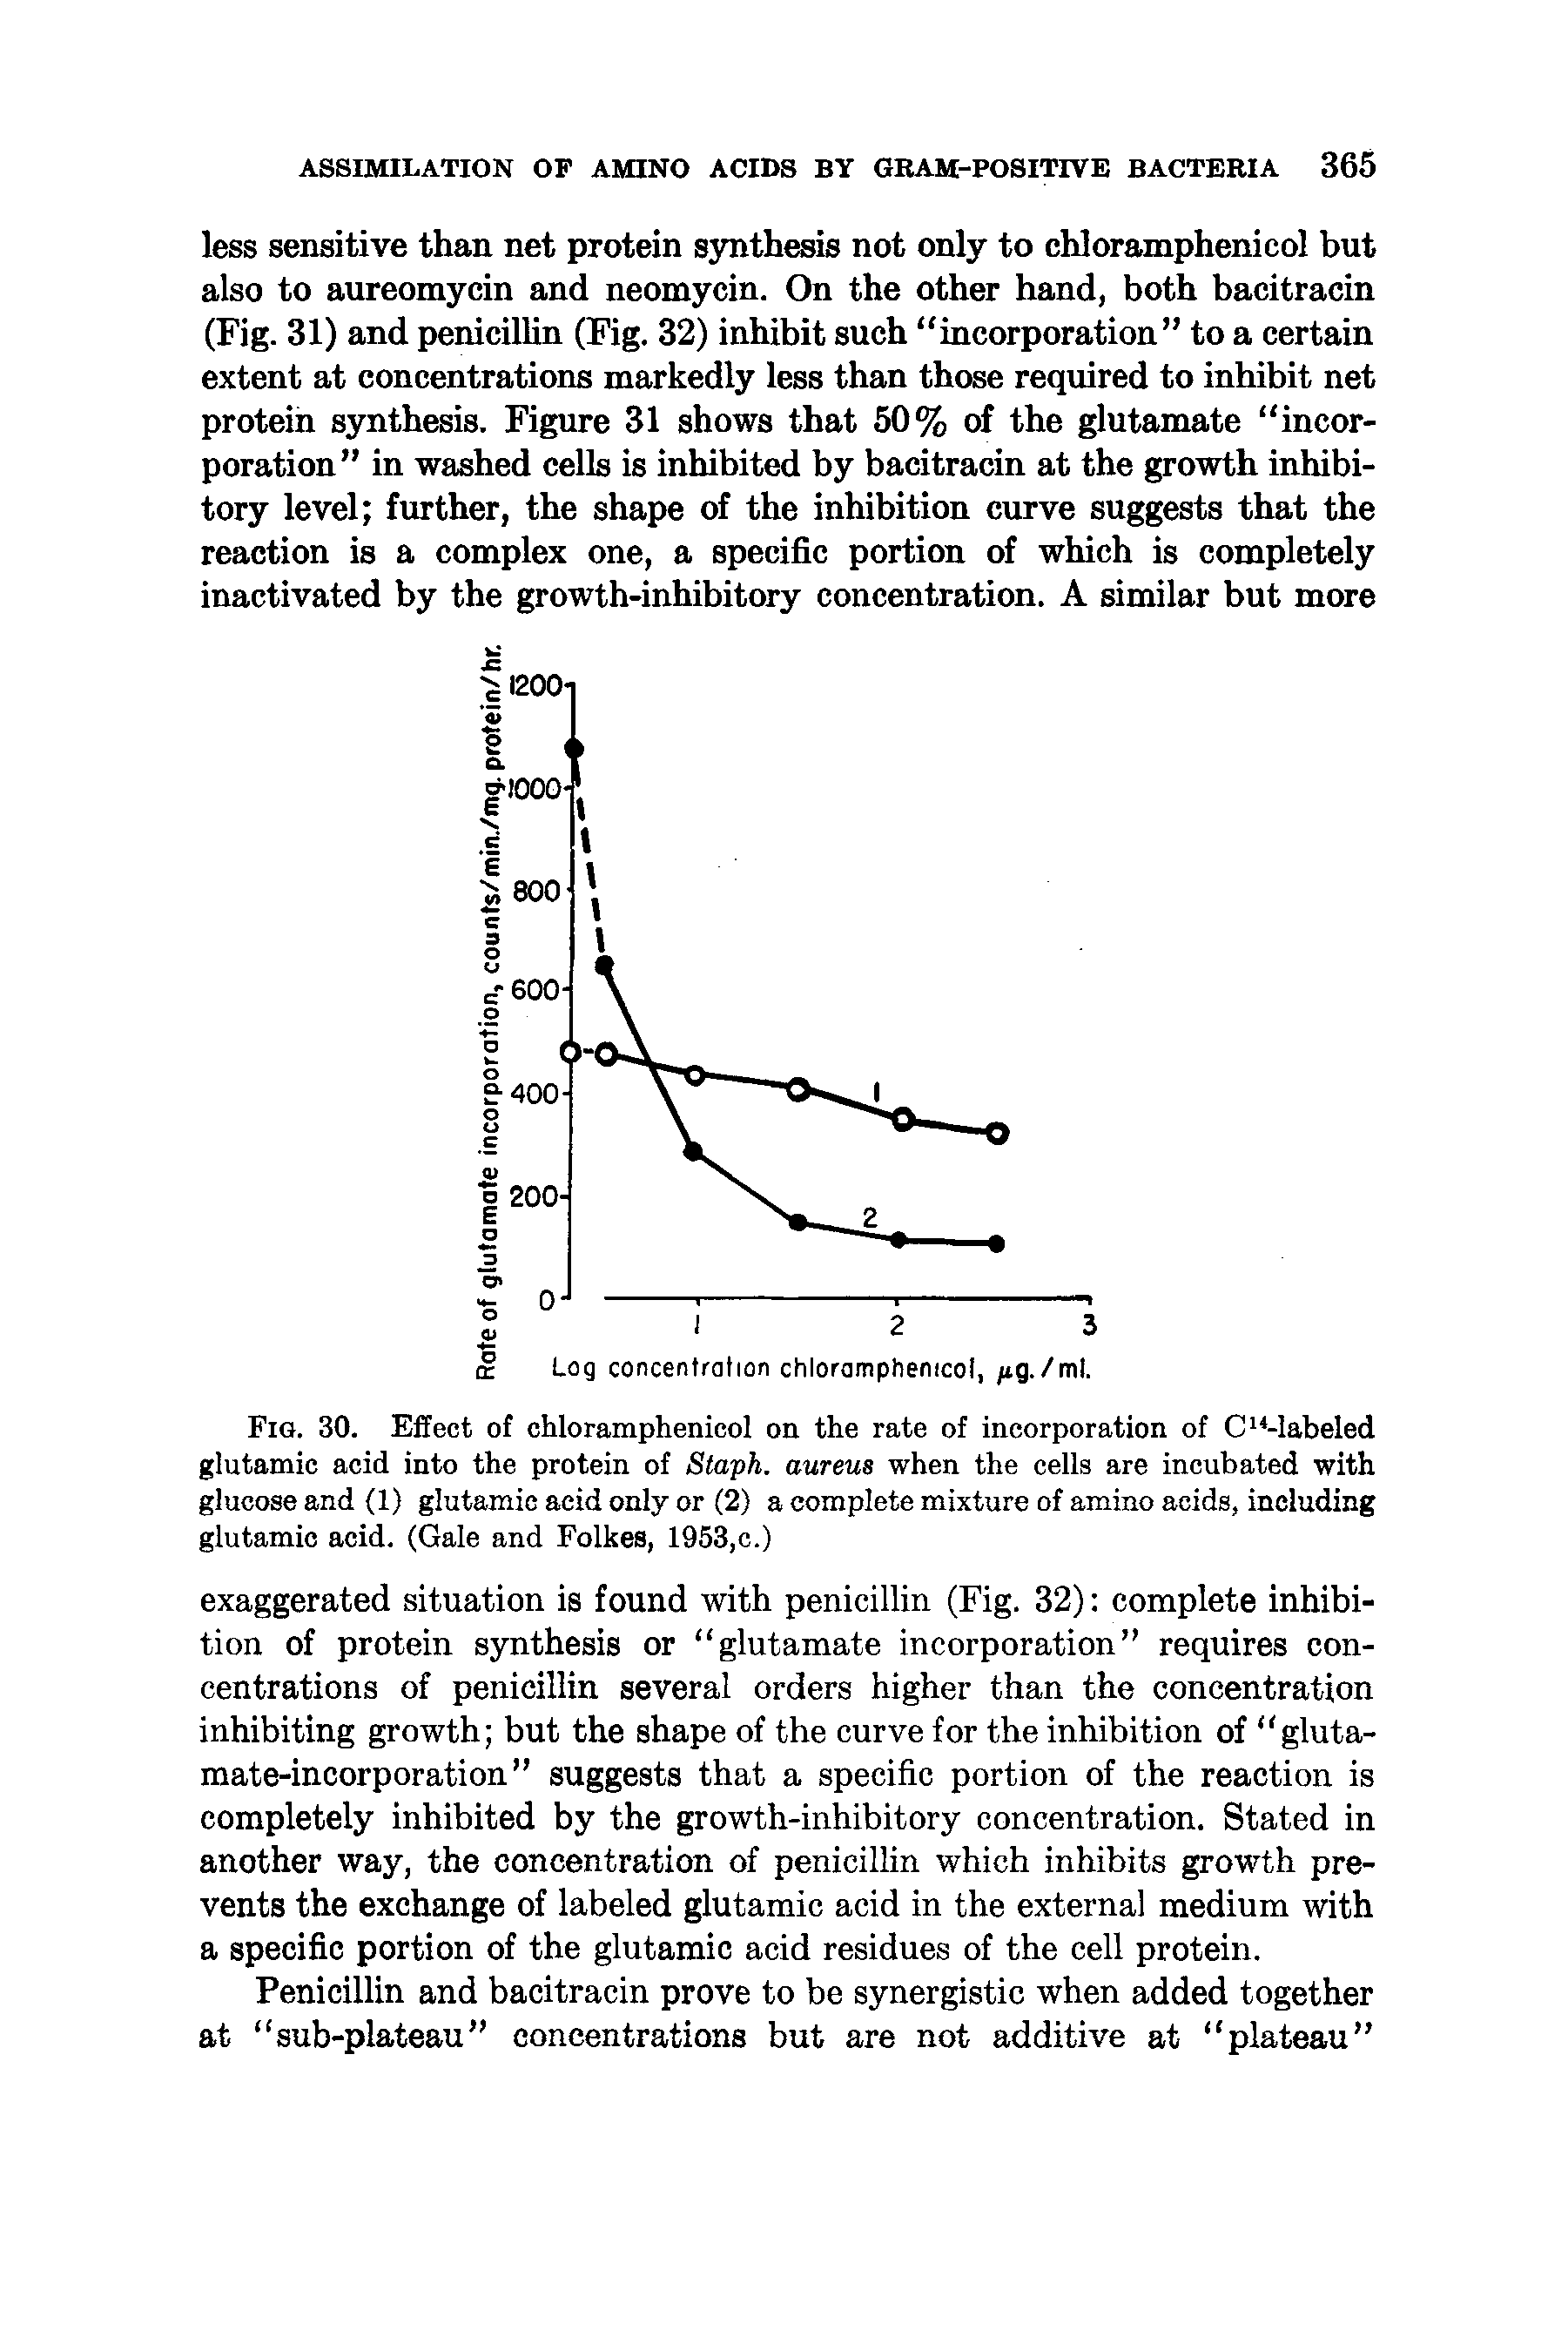 Fig. 30. Effect of chloramphenicol on the rate of incorporation of C Mabeled glutamic acid into the protein of Staph, aureus when the cells are incubated with glucose and (1) glutamic acid only or (2) a complete mixture of amino acids, including glutamic acid. (Gale and Folkes, 1953,c.)...